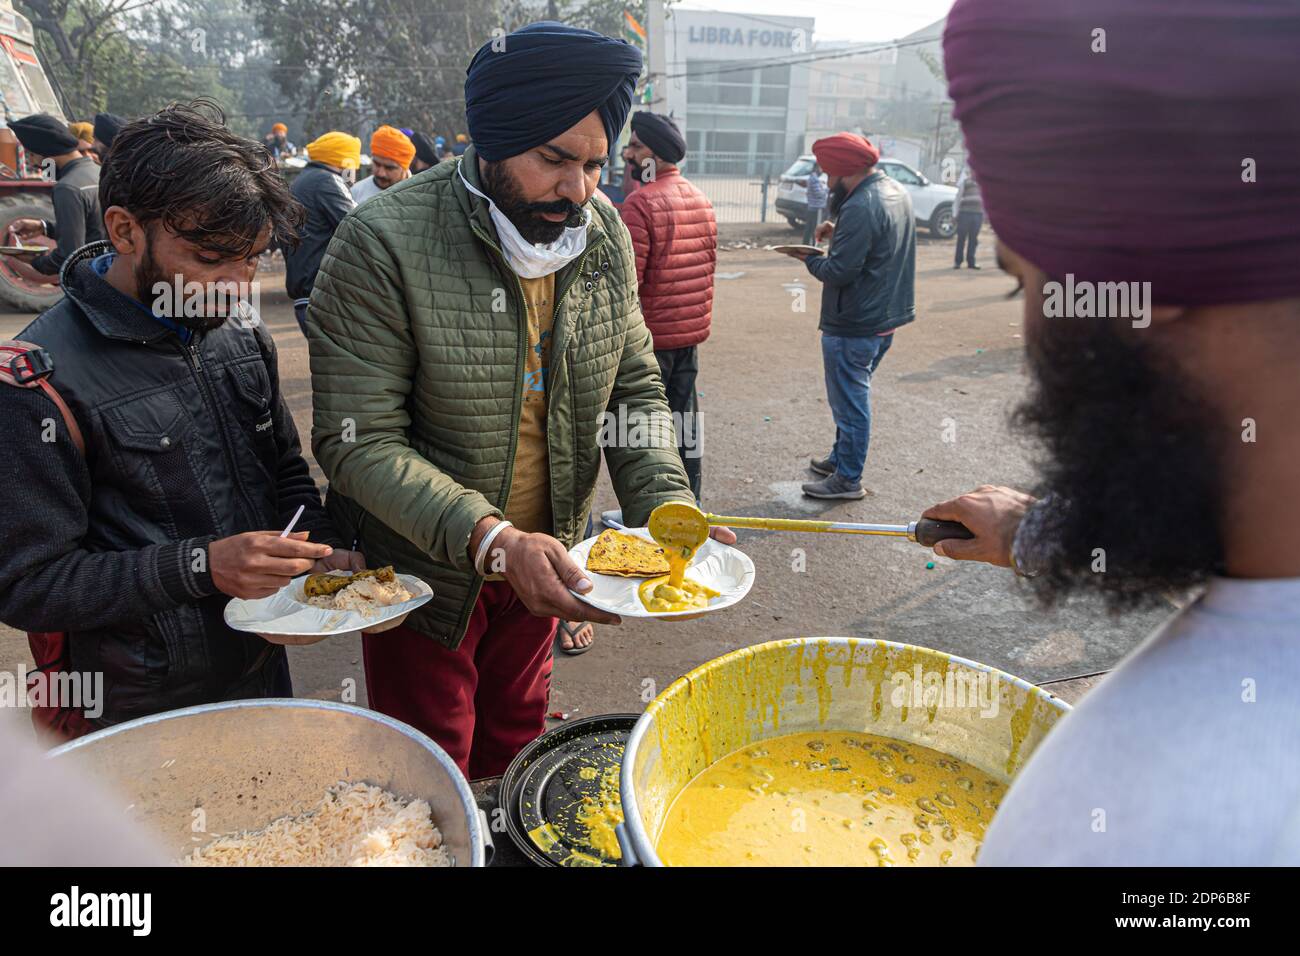 a sikh man serving food at protest site,farmers are protesting against new farm law in india. Stock Photo